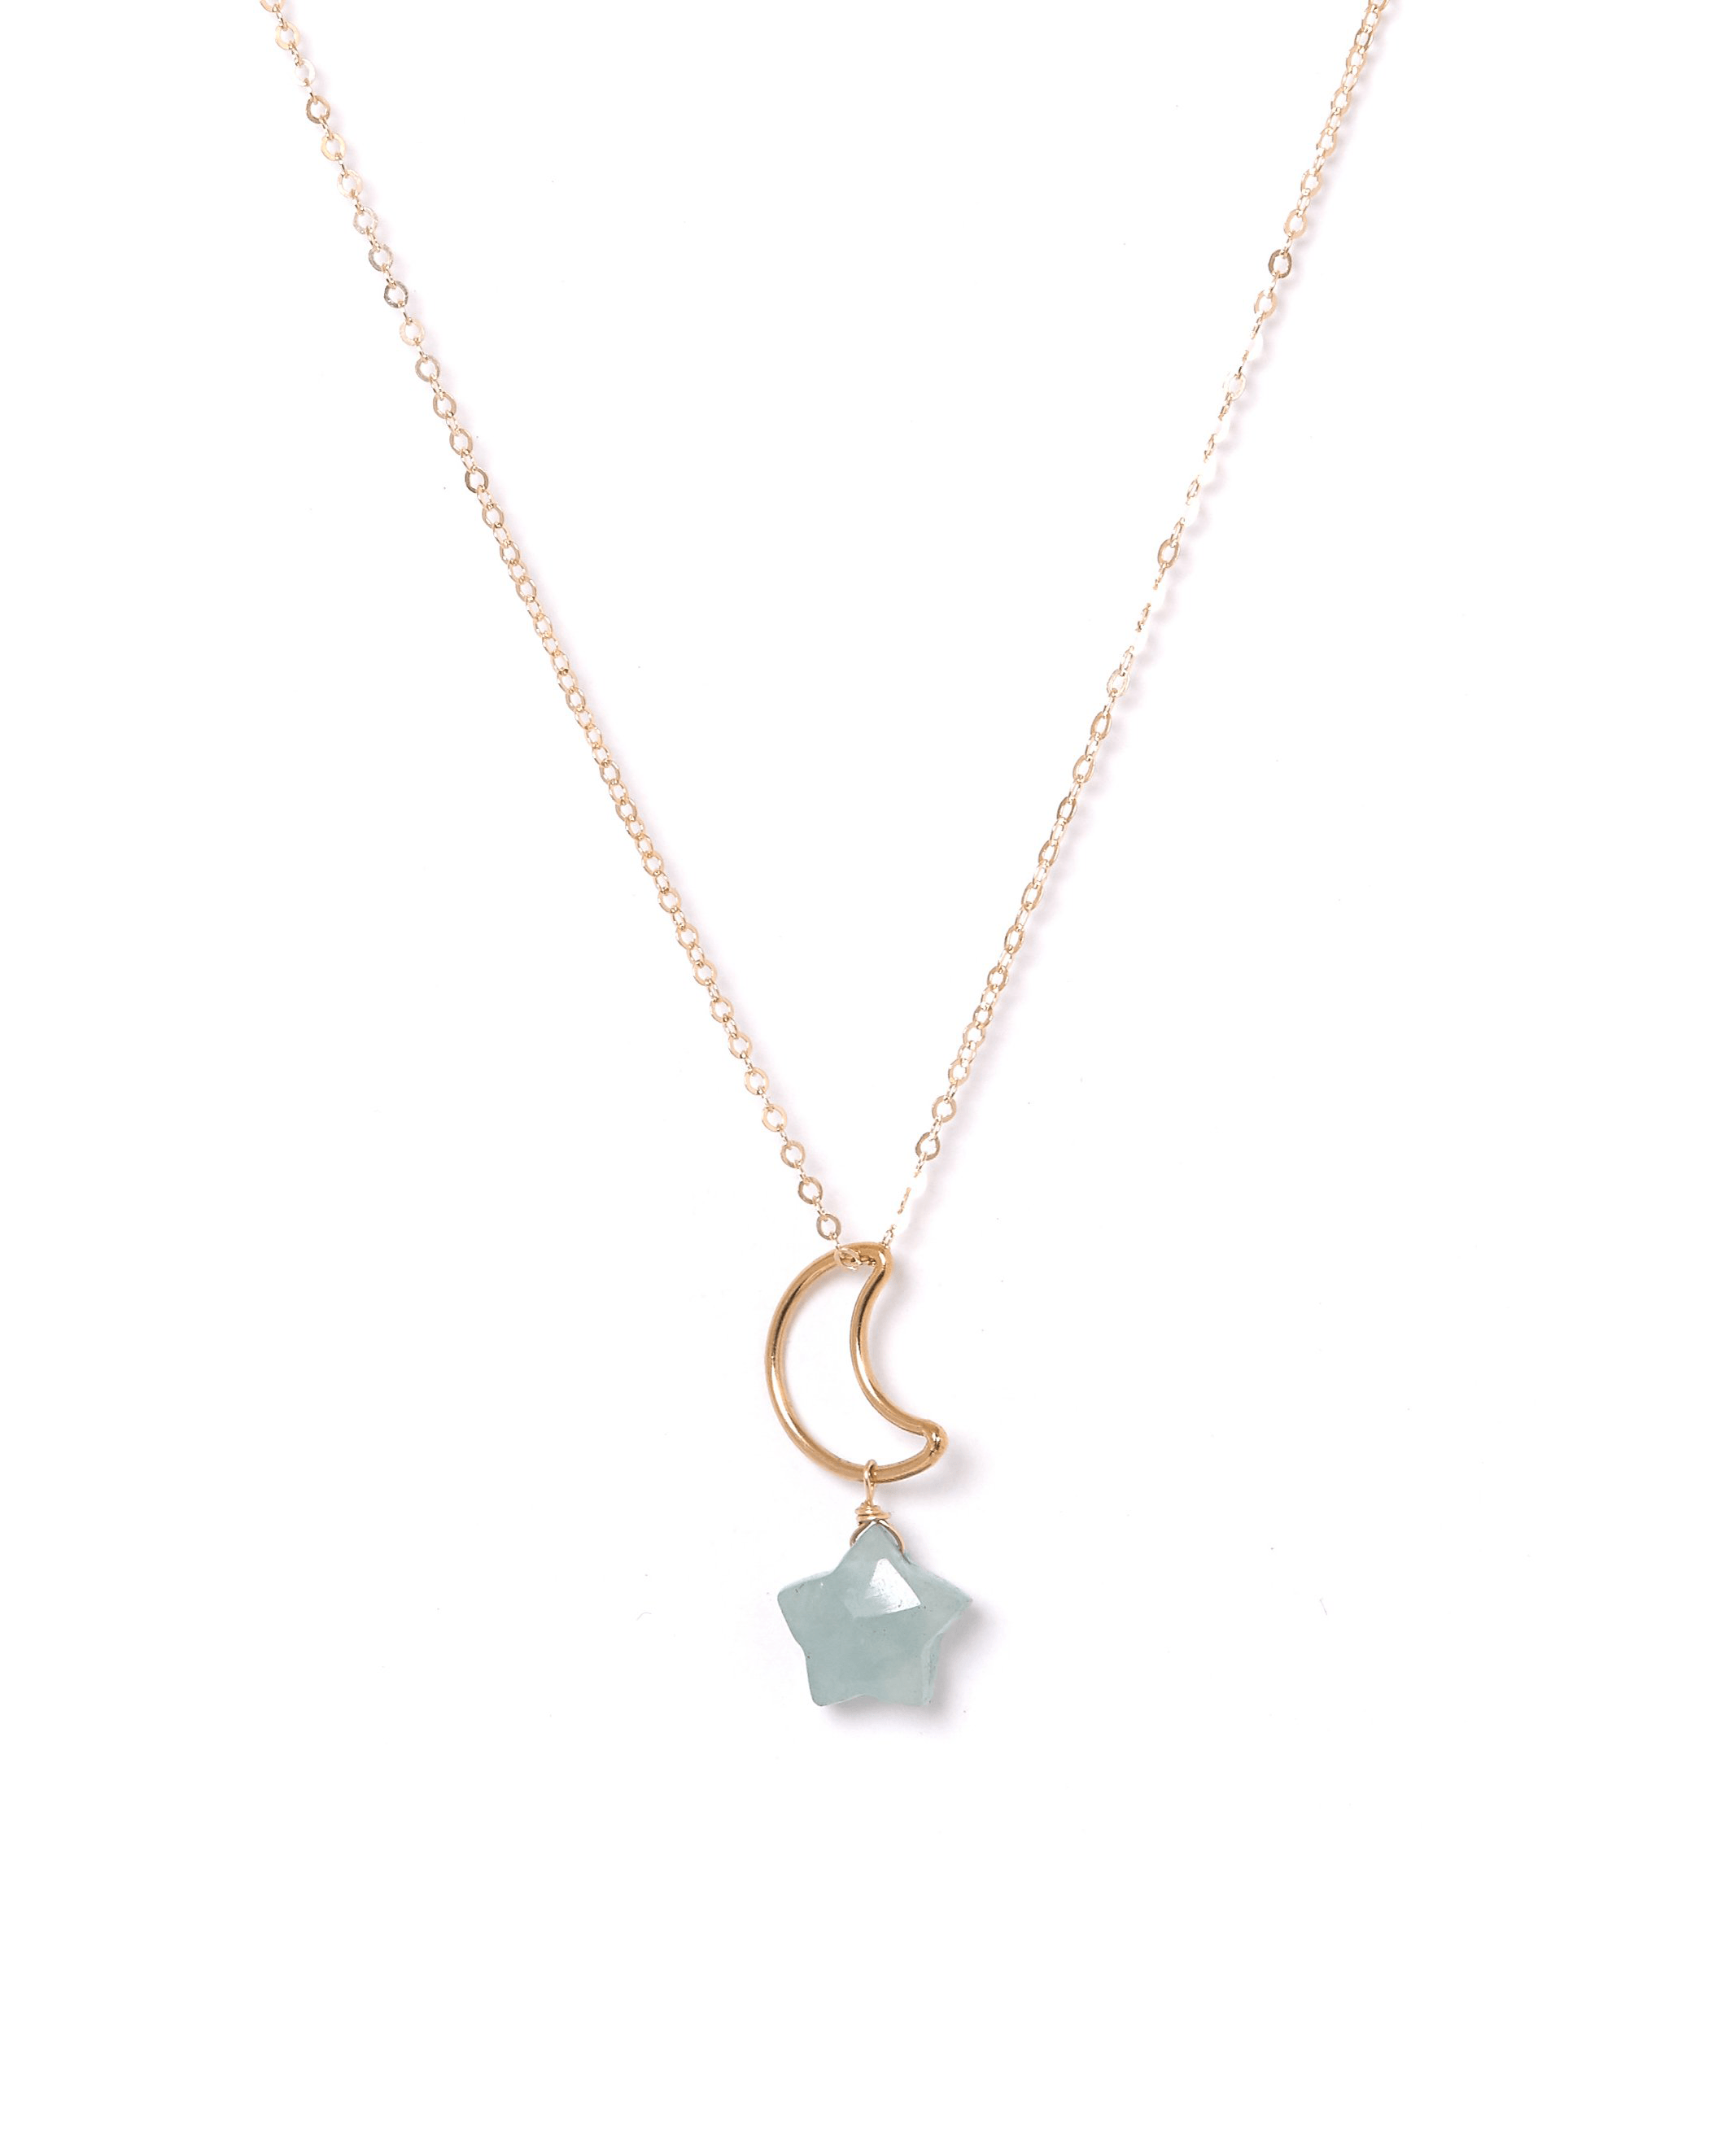 Lunastar Necklace by KOZAKH. A 16 to 18 inch adjustable length necklace, crafted in 14K Gold Filled, featuring a 13mm moon charm and an Amazonite star charm.